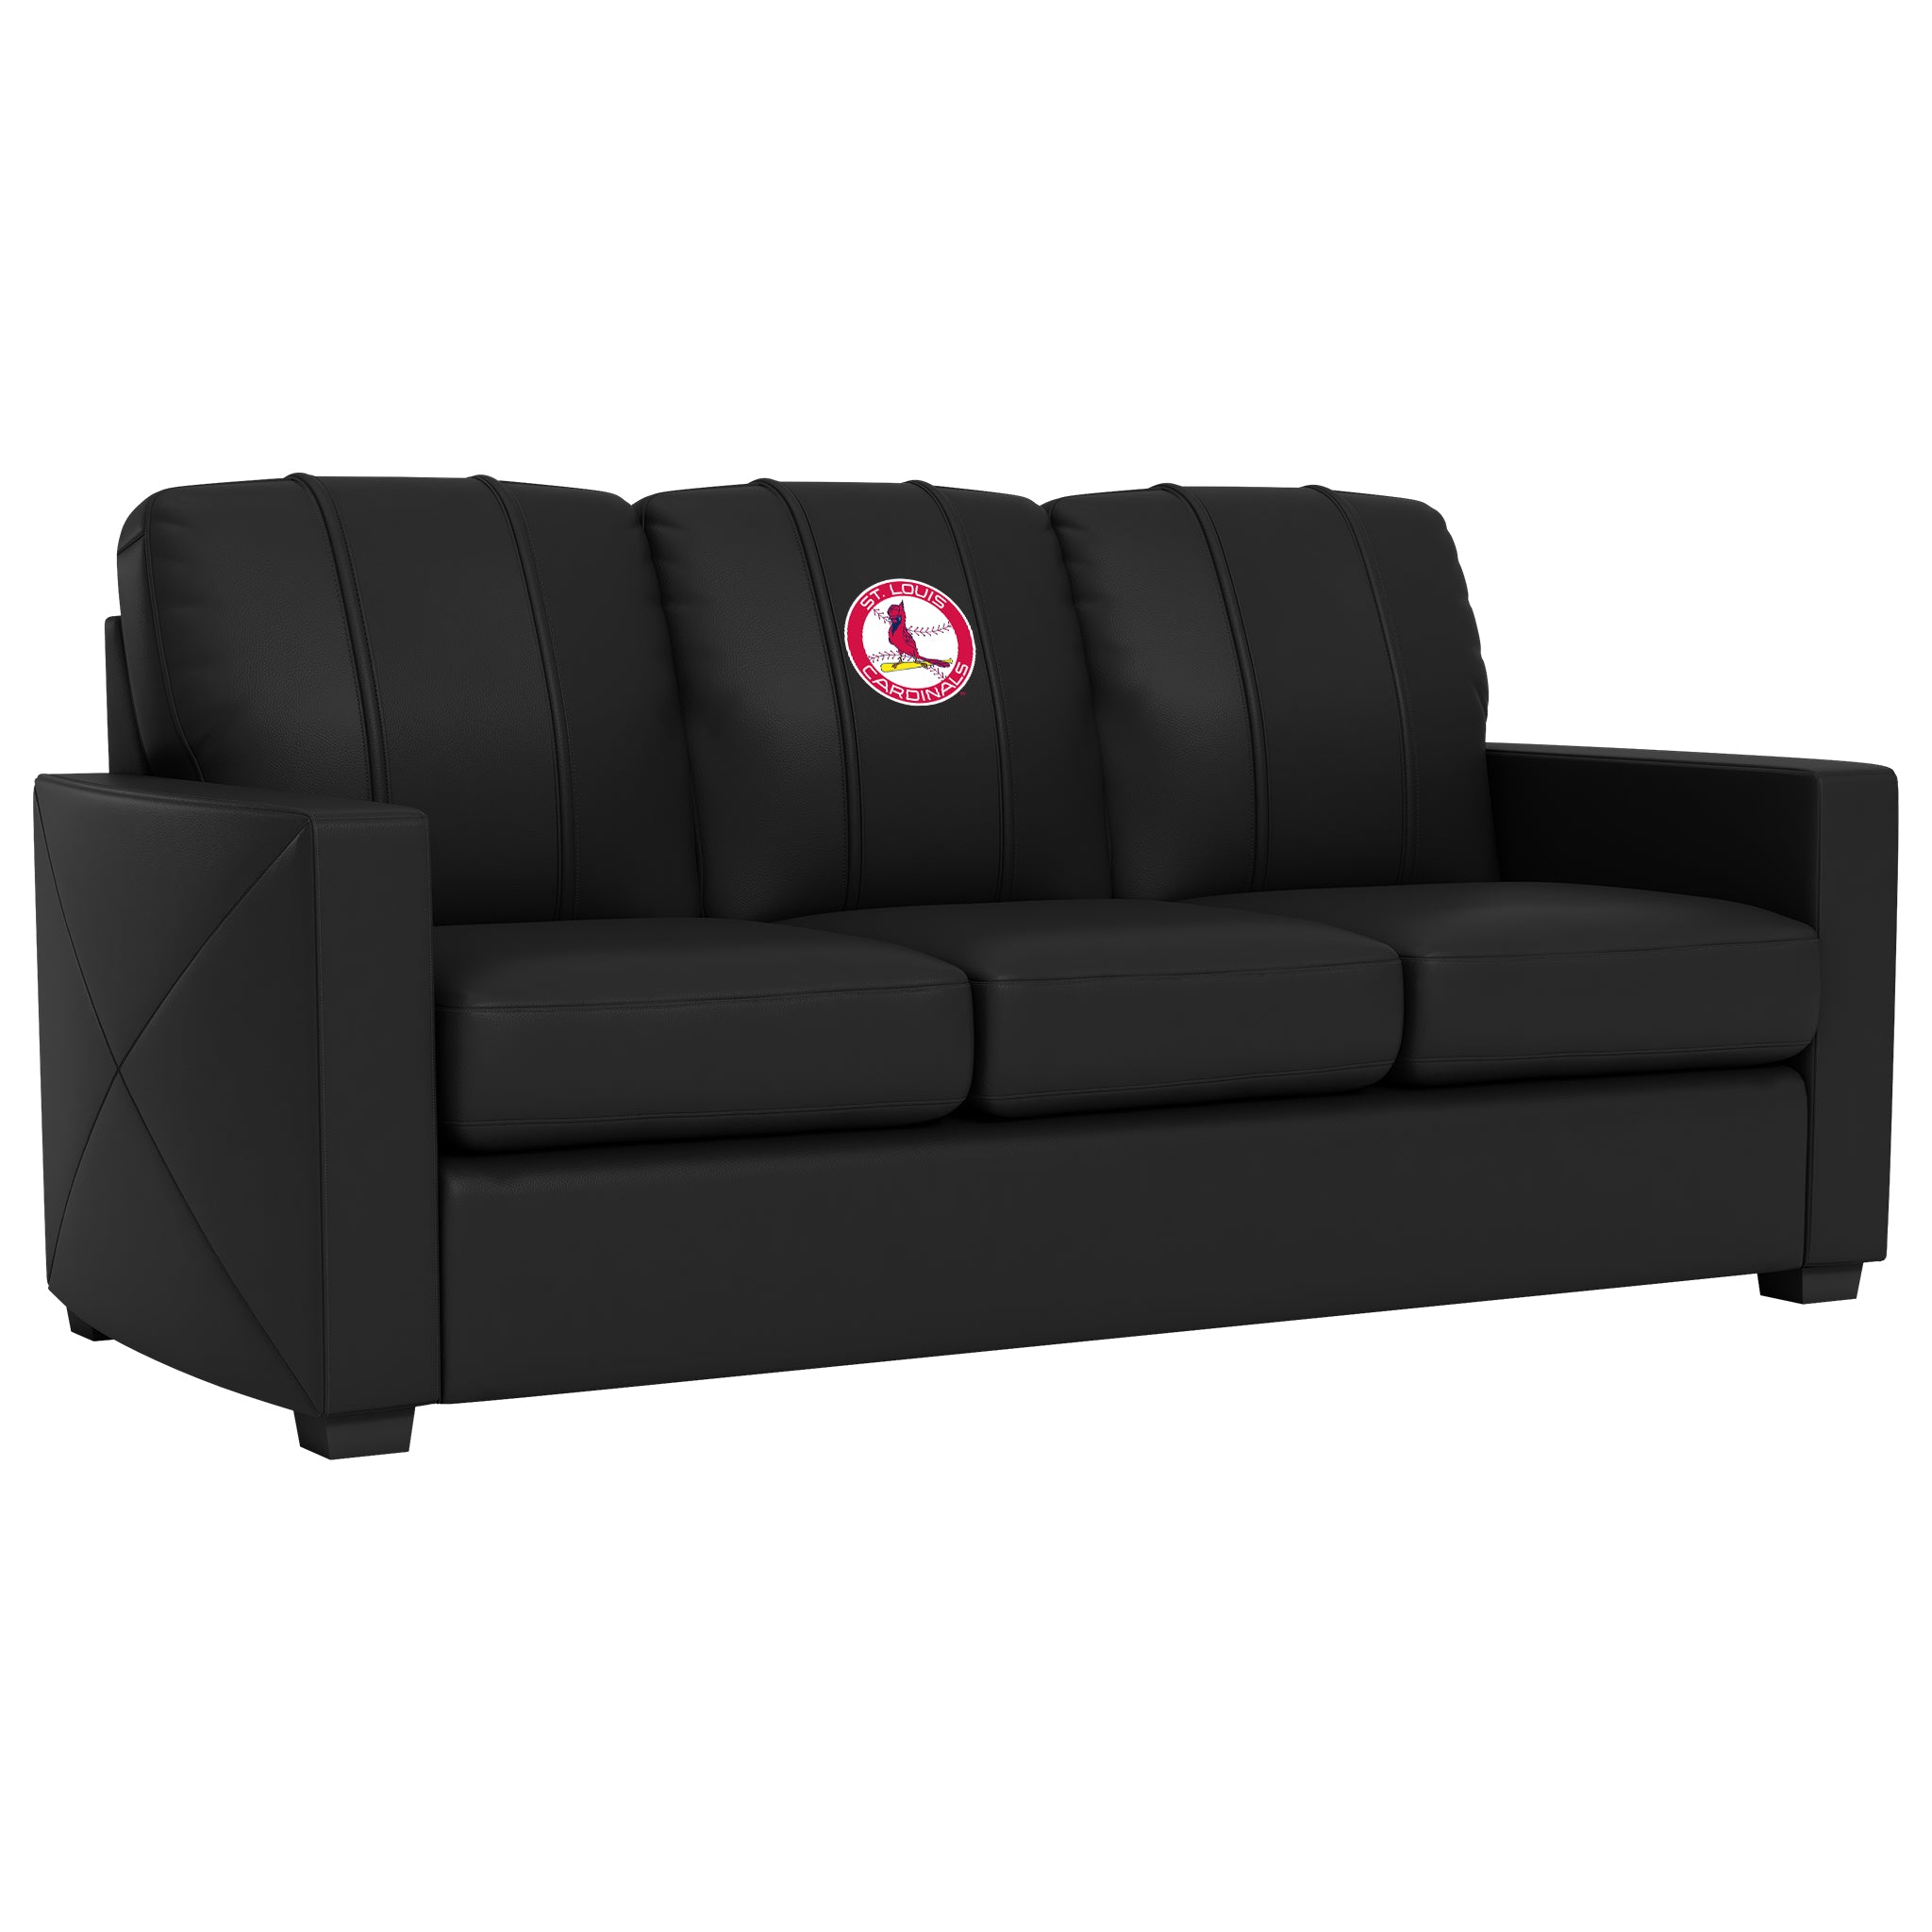 Silver Sofa with St Louis Cardinals Cooperstown Secondary